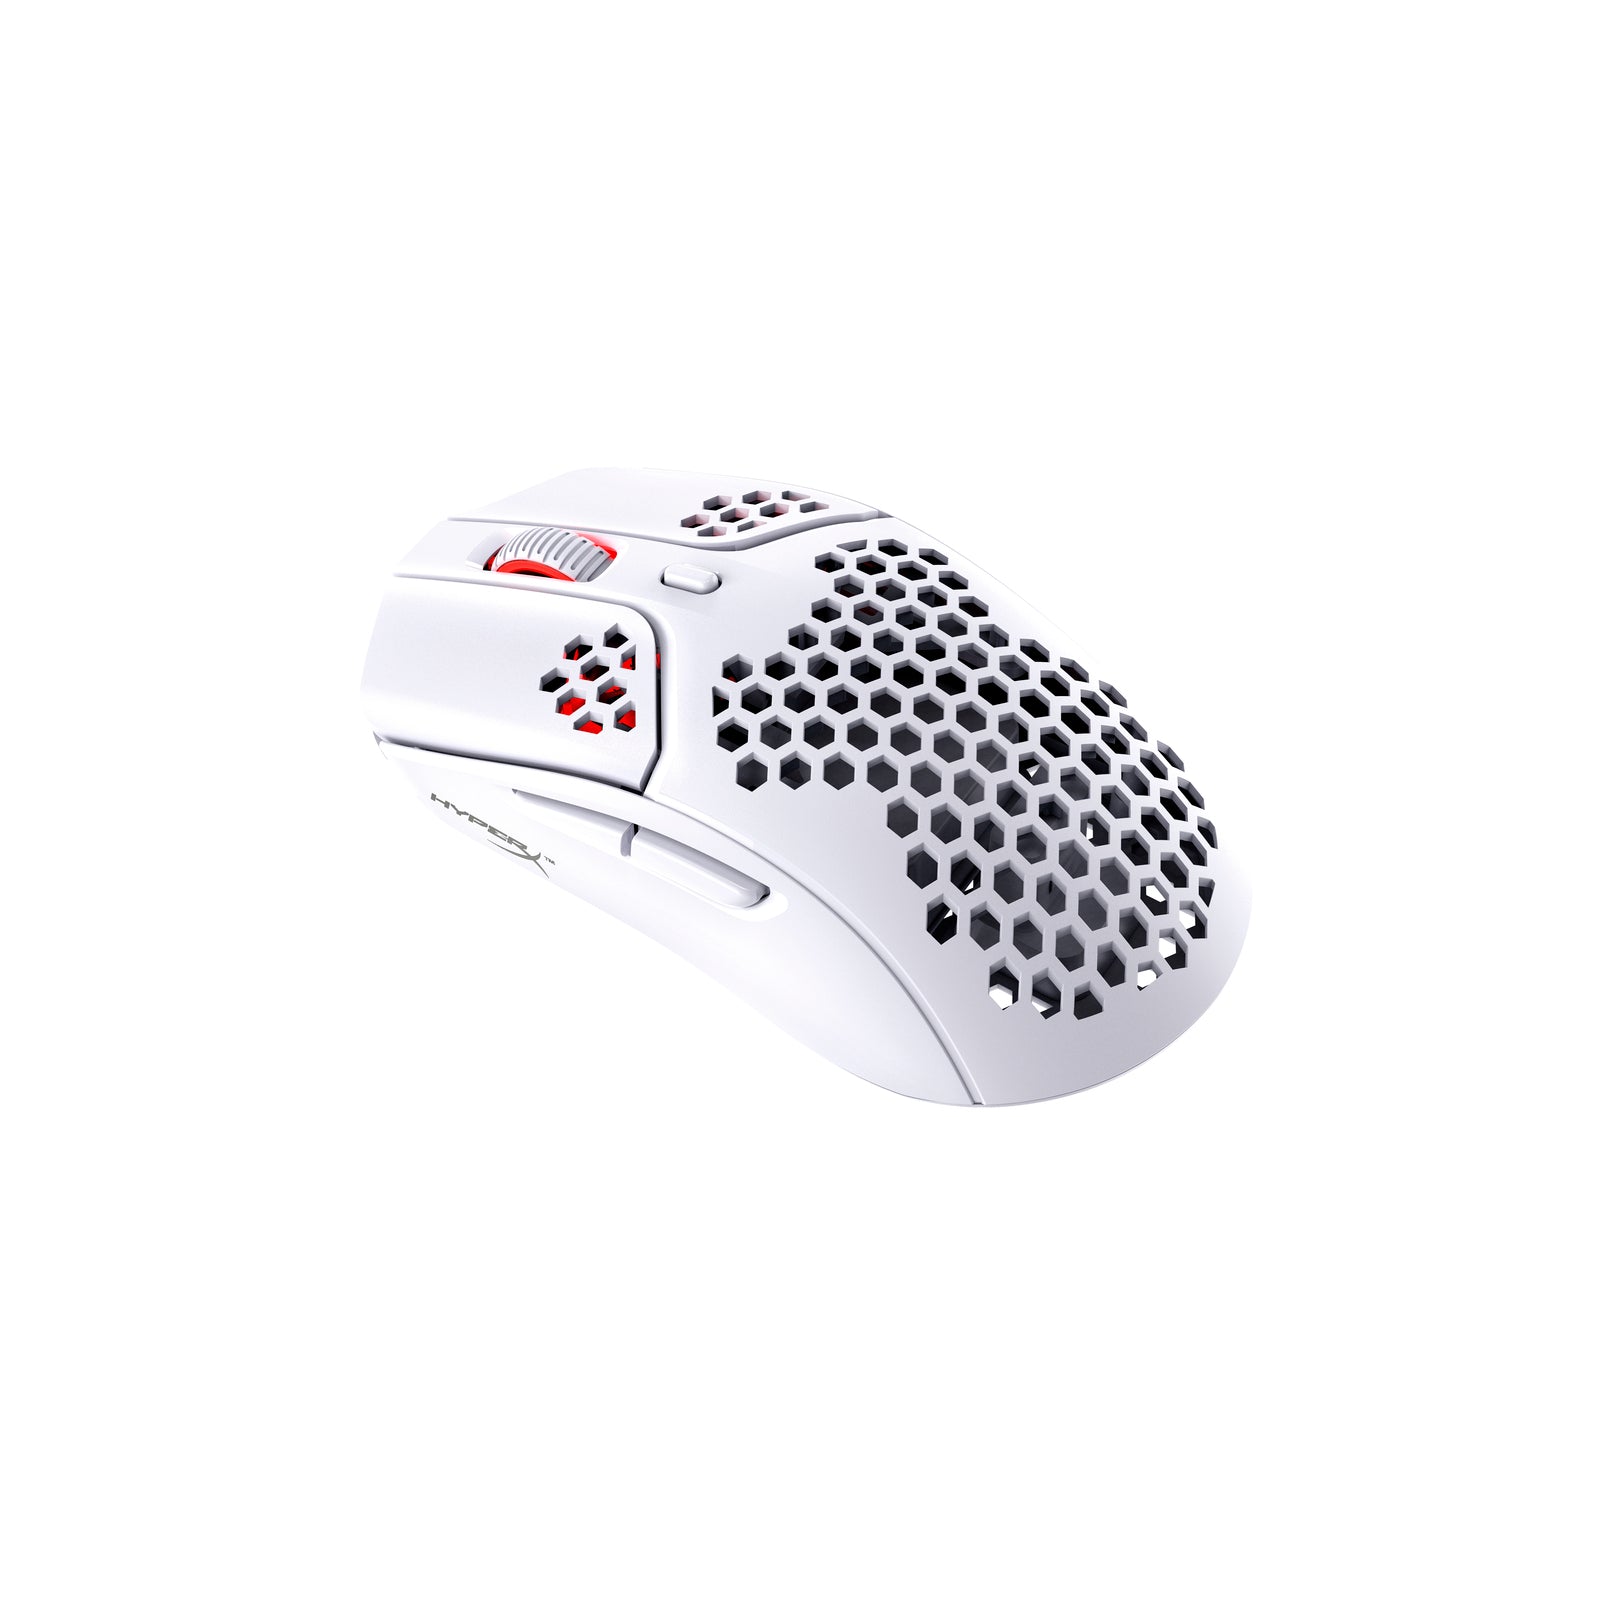 HyperX Pulsefire Haste White Wireless White Gaming Mouse - angled view from the right side